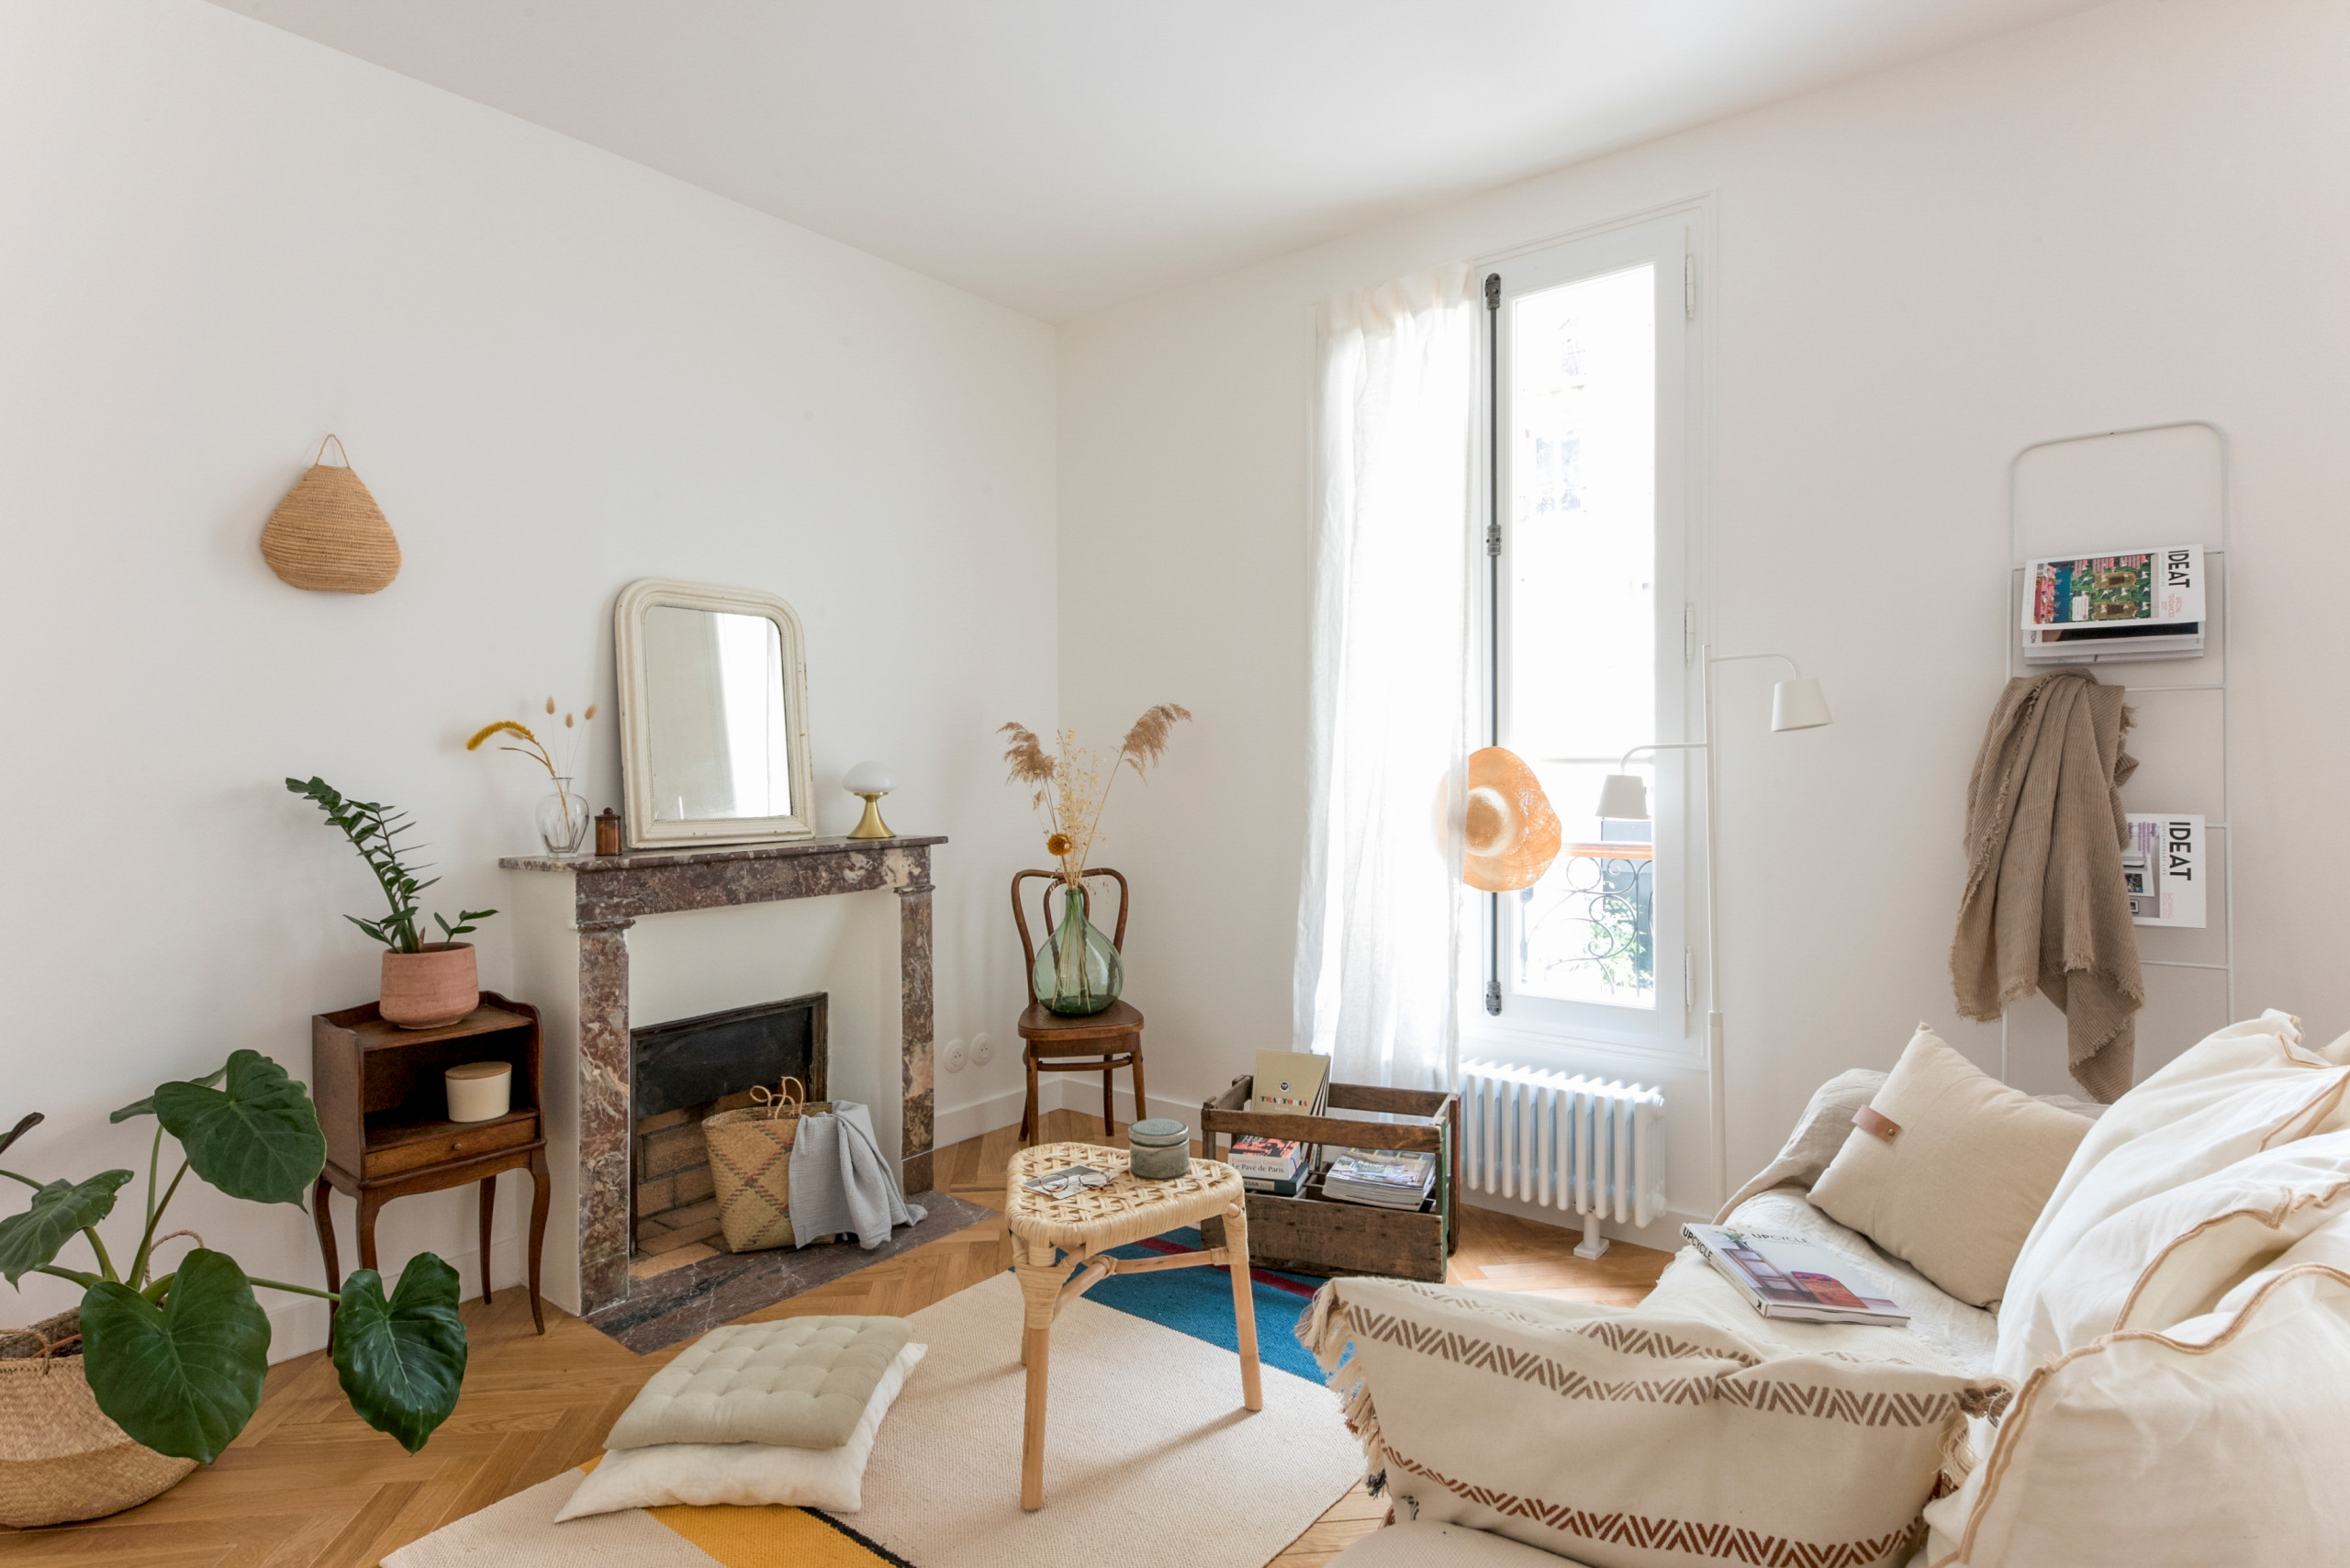 Houzz Tour: An Abandoned Home is Beautifully Revived for a Family | Houzz UK